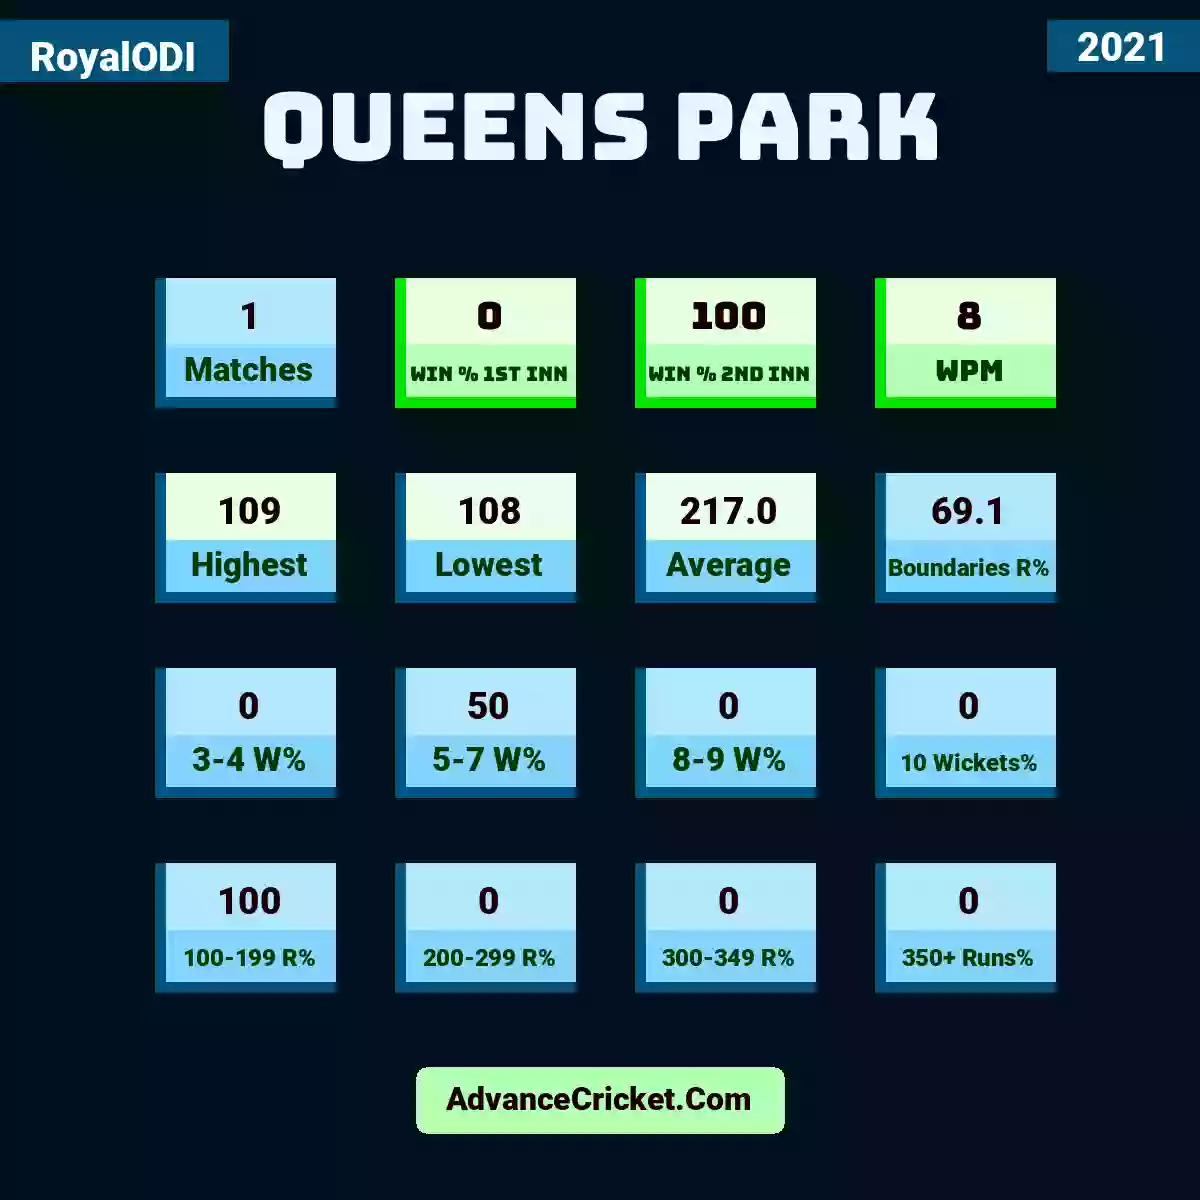 Image showing Queens Park with Matches: 1, Win % 1st Inn: 0, Win % 2nd Inn: 100, WPM: 8, Highest: 109, Lowest: 108, Average: 217.0, Boundaries R%: 69.1, 3-4 W%: 0, 5-7 W%: 50, 8-9 W%: 0, 10 Wickets%: 0, 100-199 R%: 100, 200-299 R%: 0, 300-349 R%: 0, 350+ Runs%: 0.